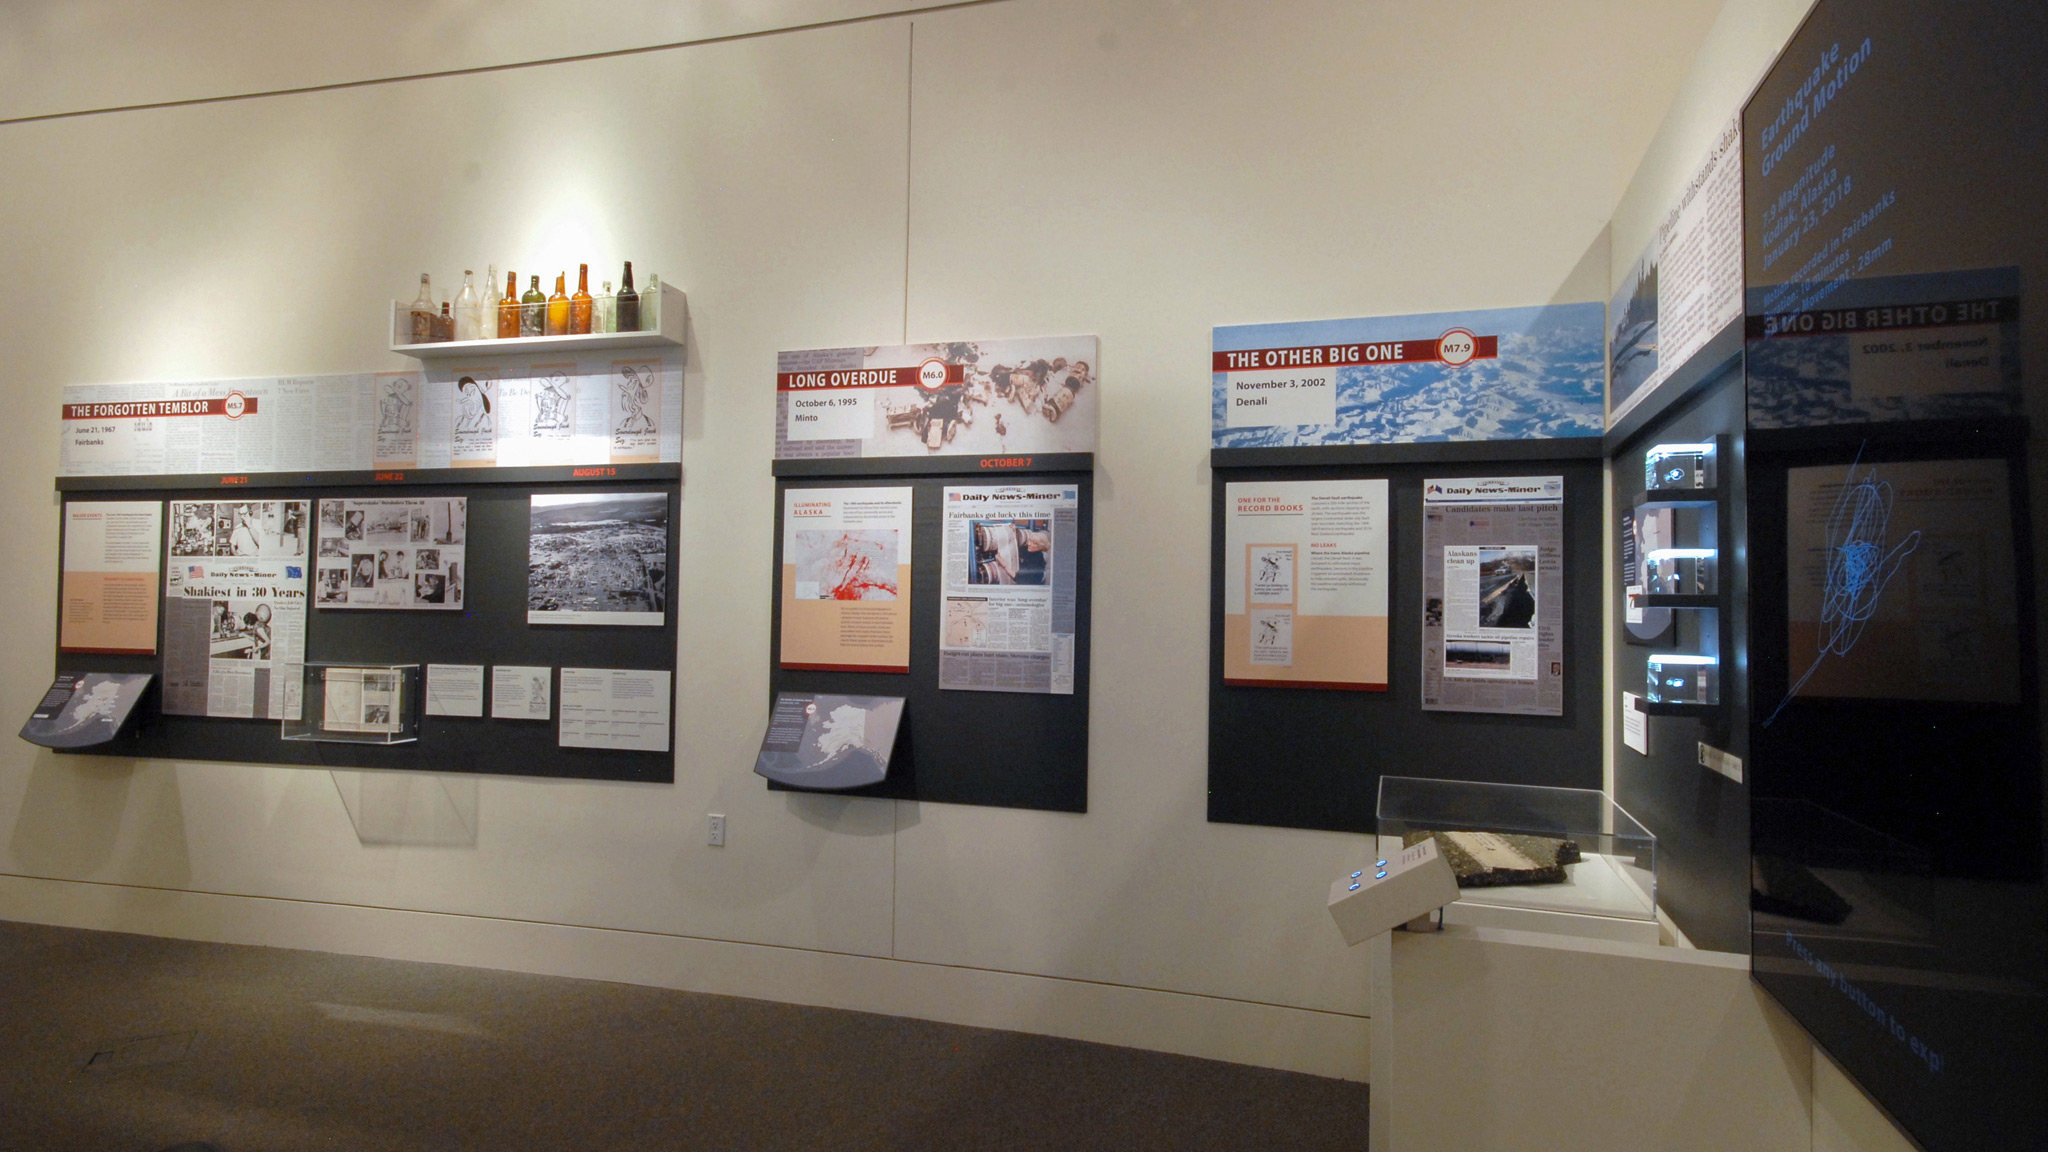 This part of the south wall showcased events from 1967, 1995, and 2002, as well as the digital newspapers collection and scale models of ground motion in Alaska.